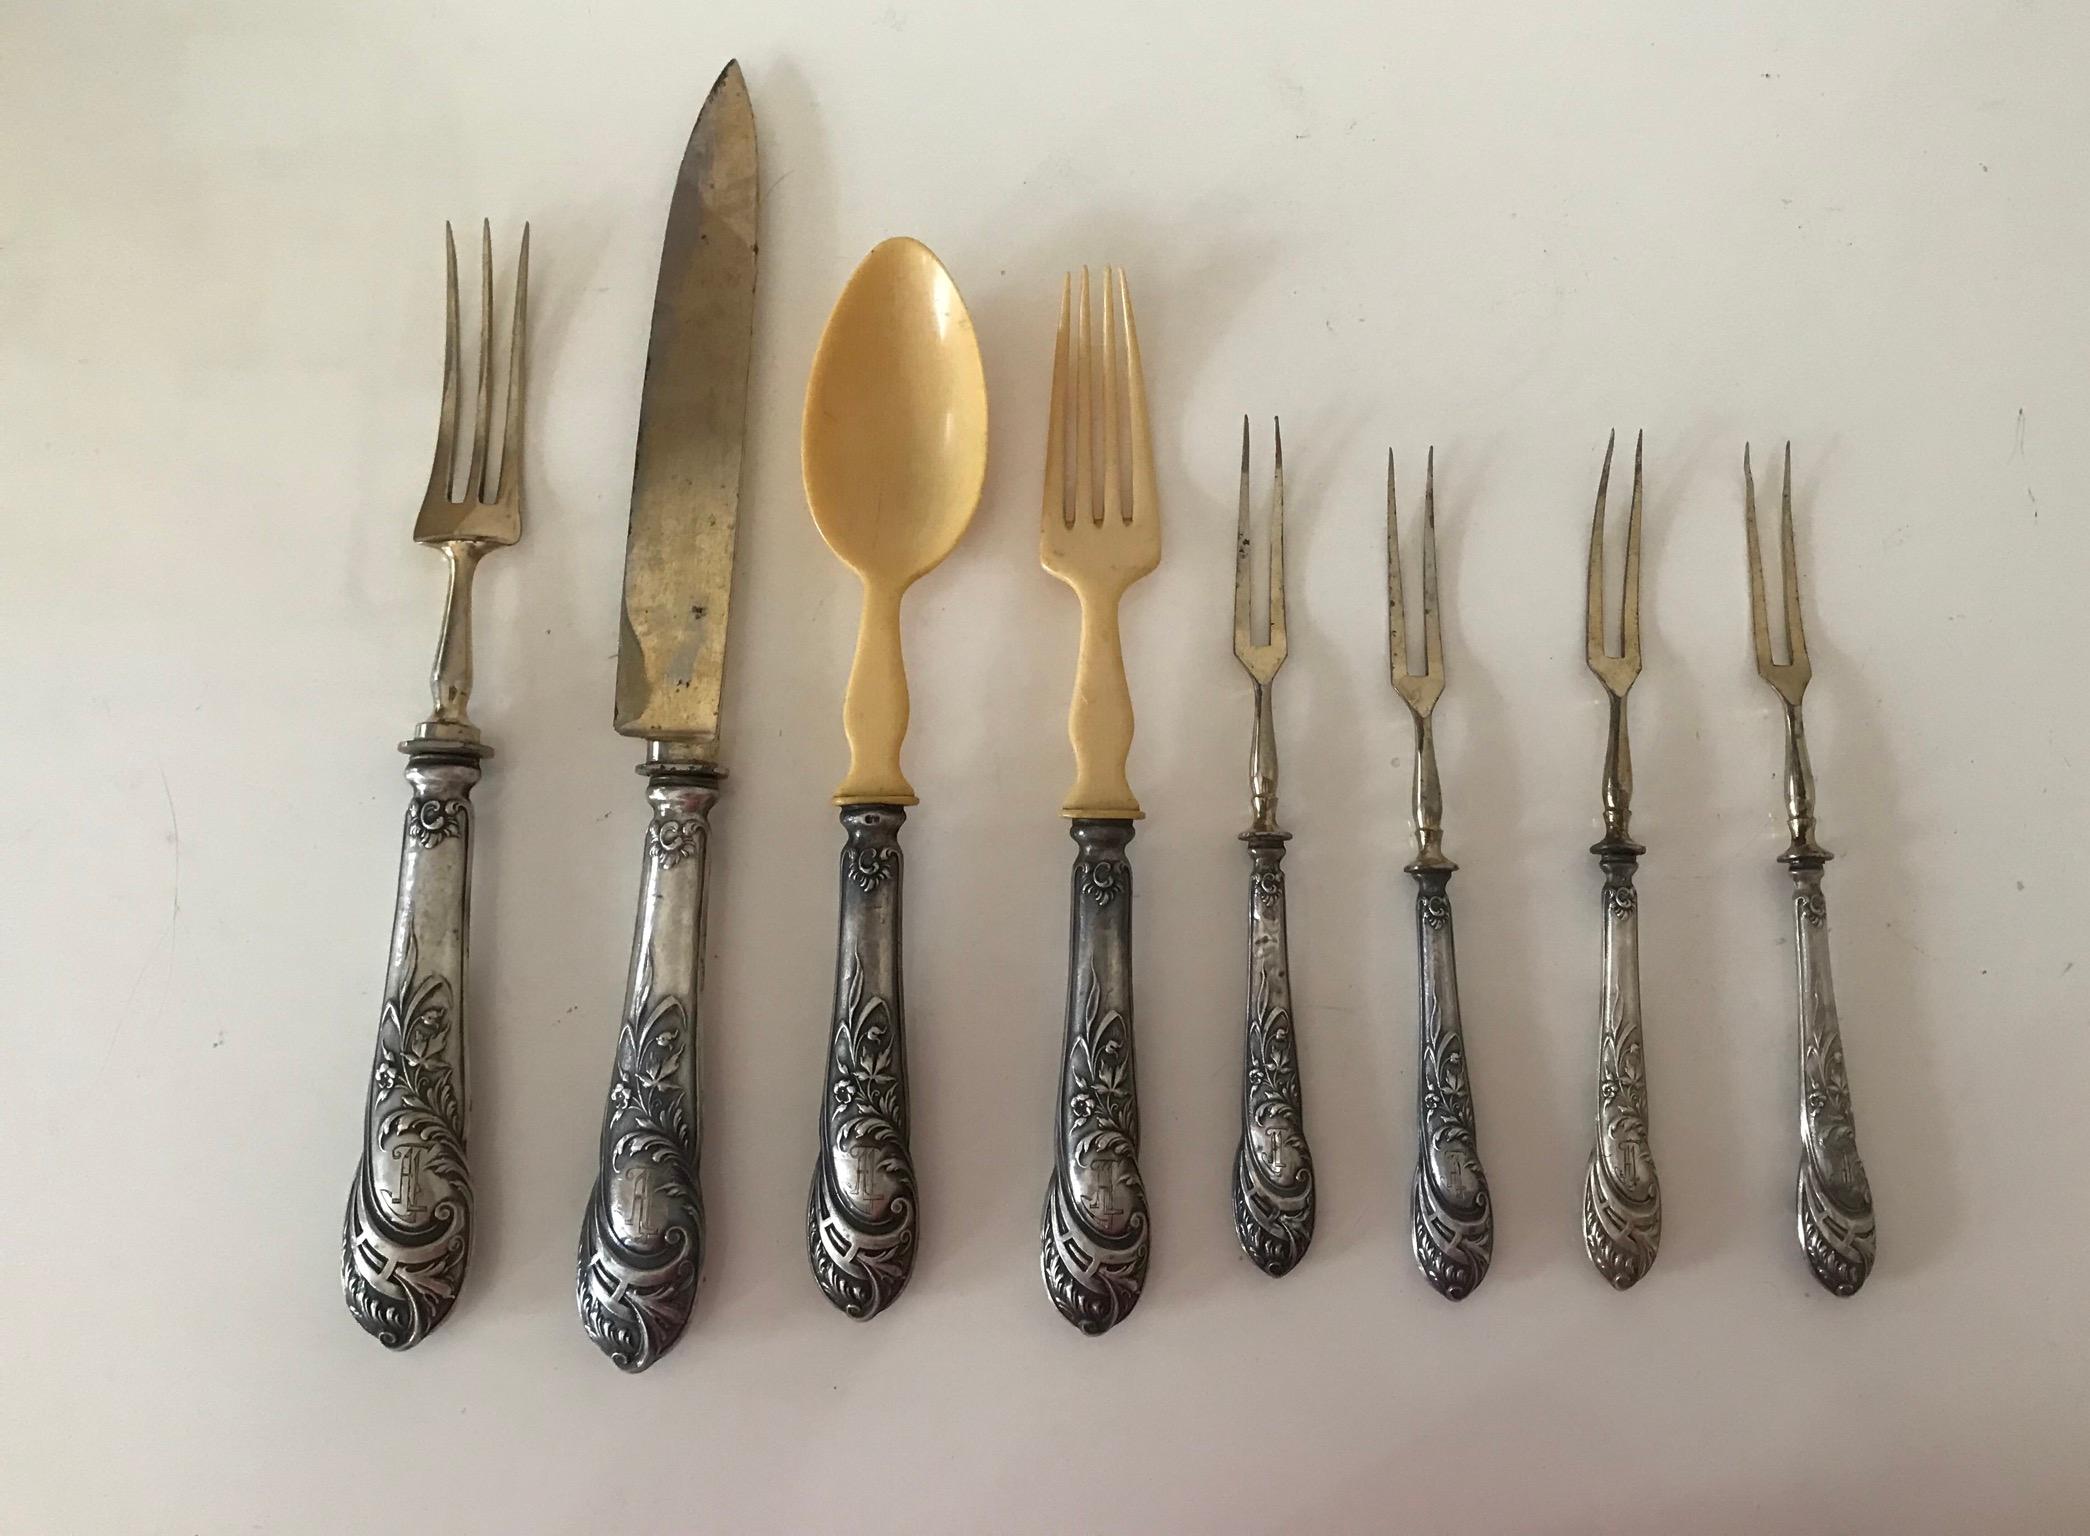 Baroque Revival Antique Silver Cutlery Carving set of 8 pcs For Sale